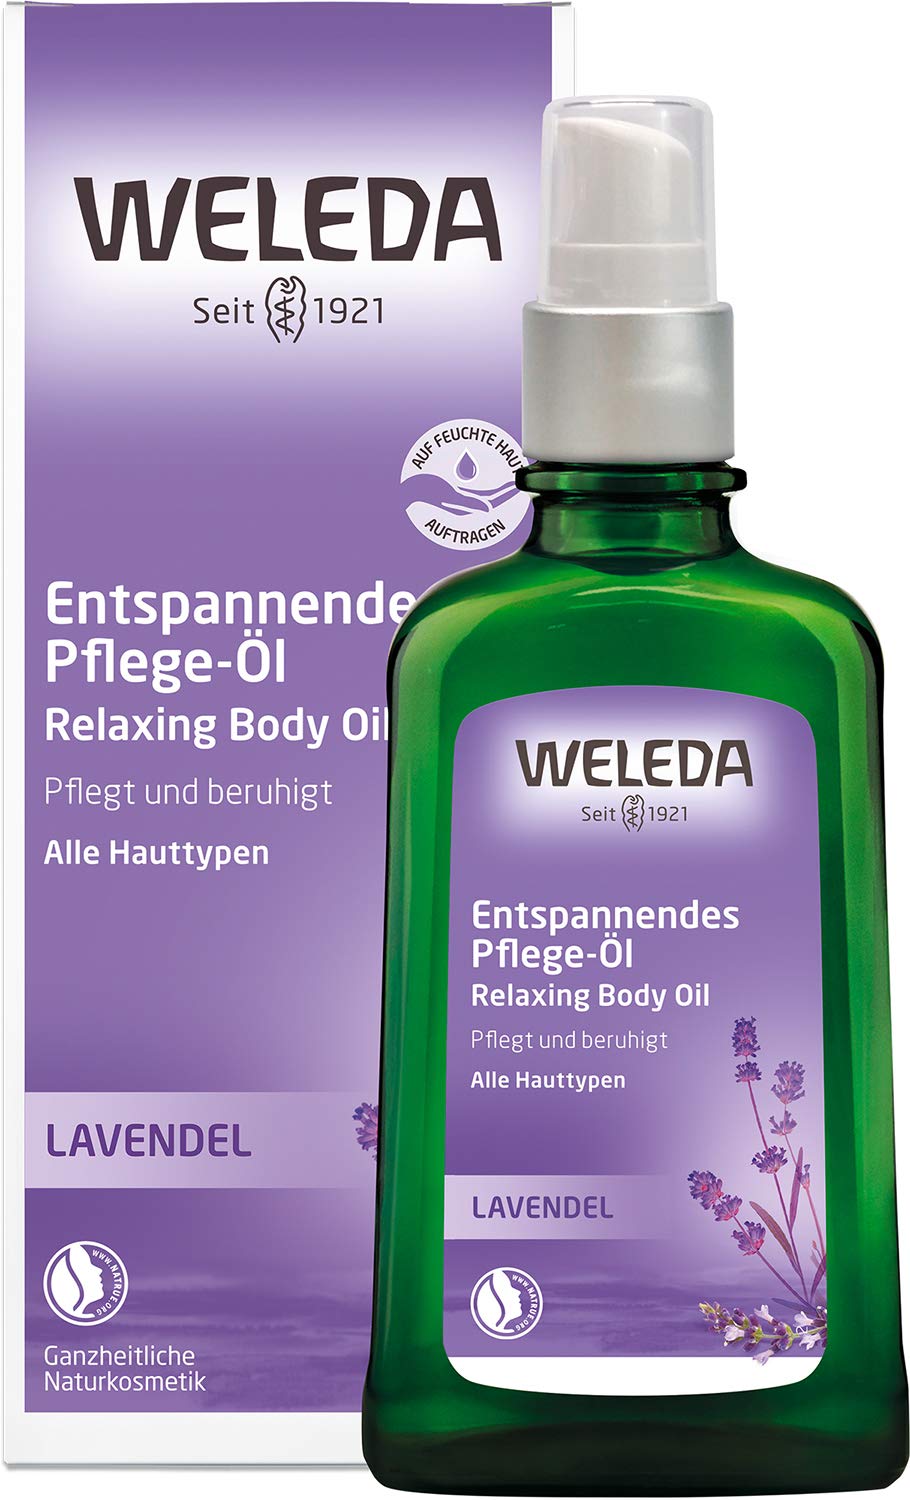 WELEDA Lavender Relaxation Oil, Essential Natural Cosmetics Massage and Body Oil from Lavender for Care and Relaxation for the Body with Pleasant Fragrance (1 x 100 ml), ‎green